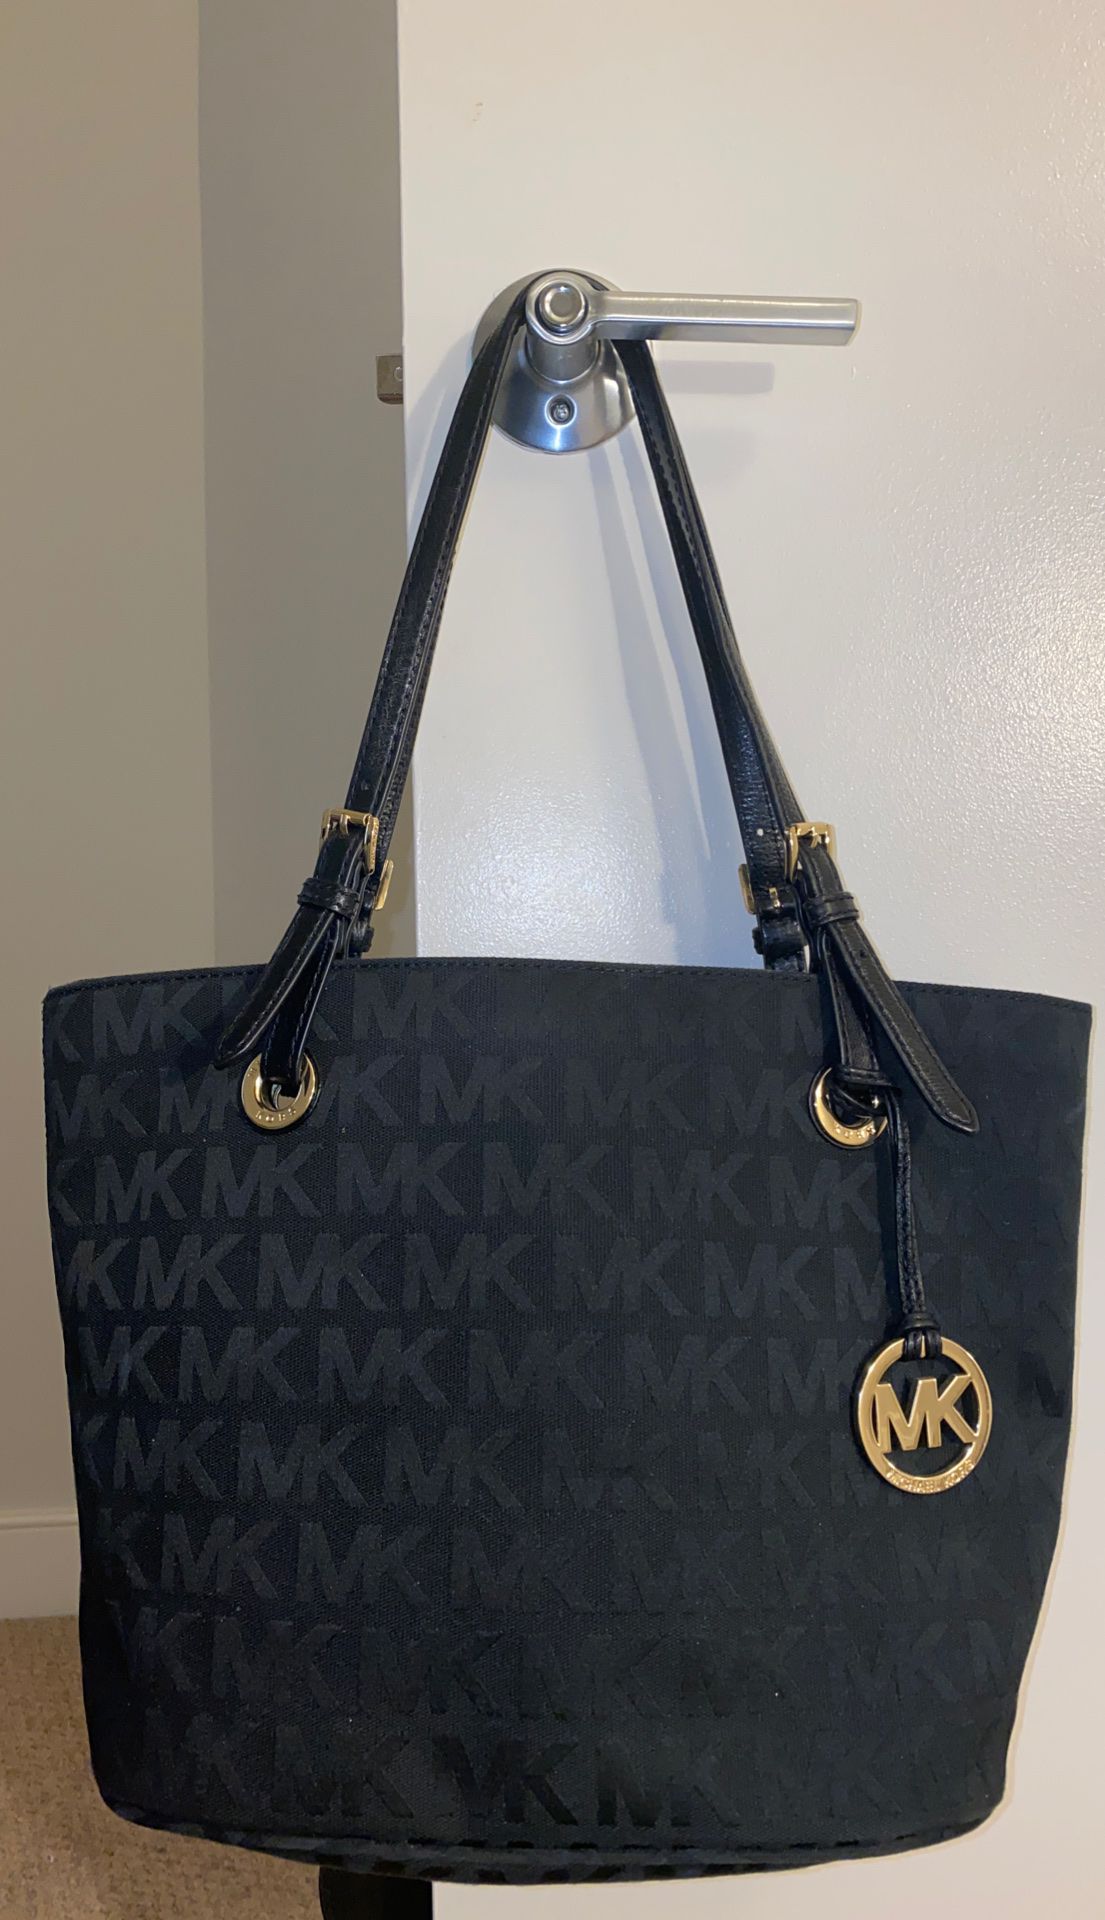 Michael Kors Tote great condition!